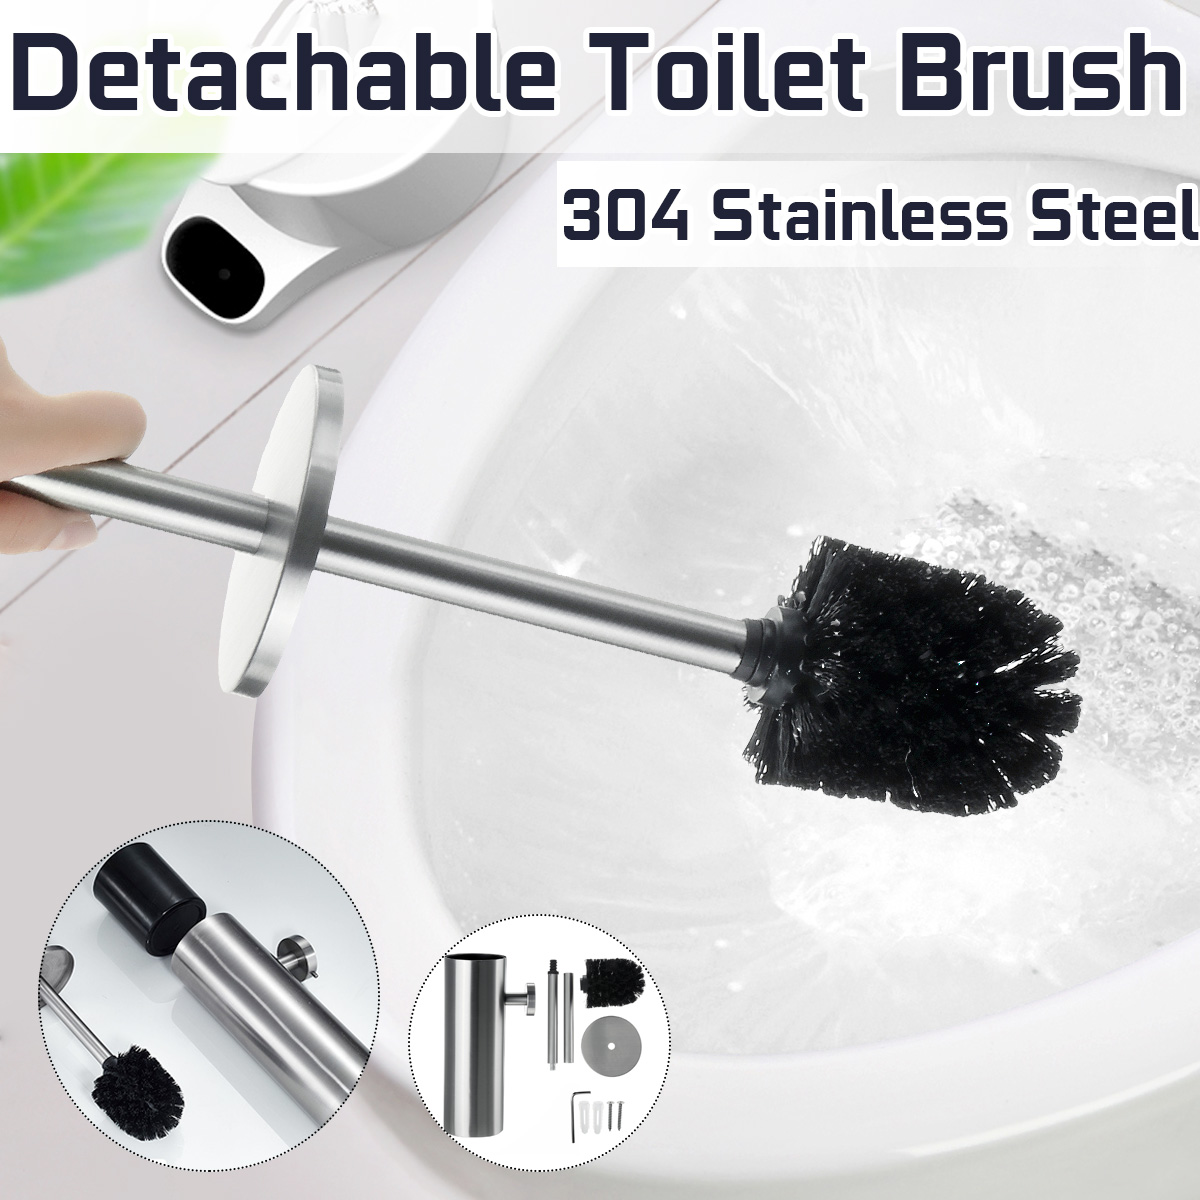 Toilet-Cleaning-Brushes-Wall-mounted-Stainless-Steel-Handle-Toilet-Bathroom-Easy-install-1600807-1